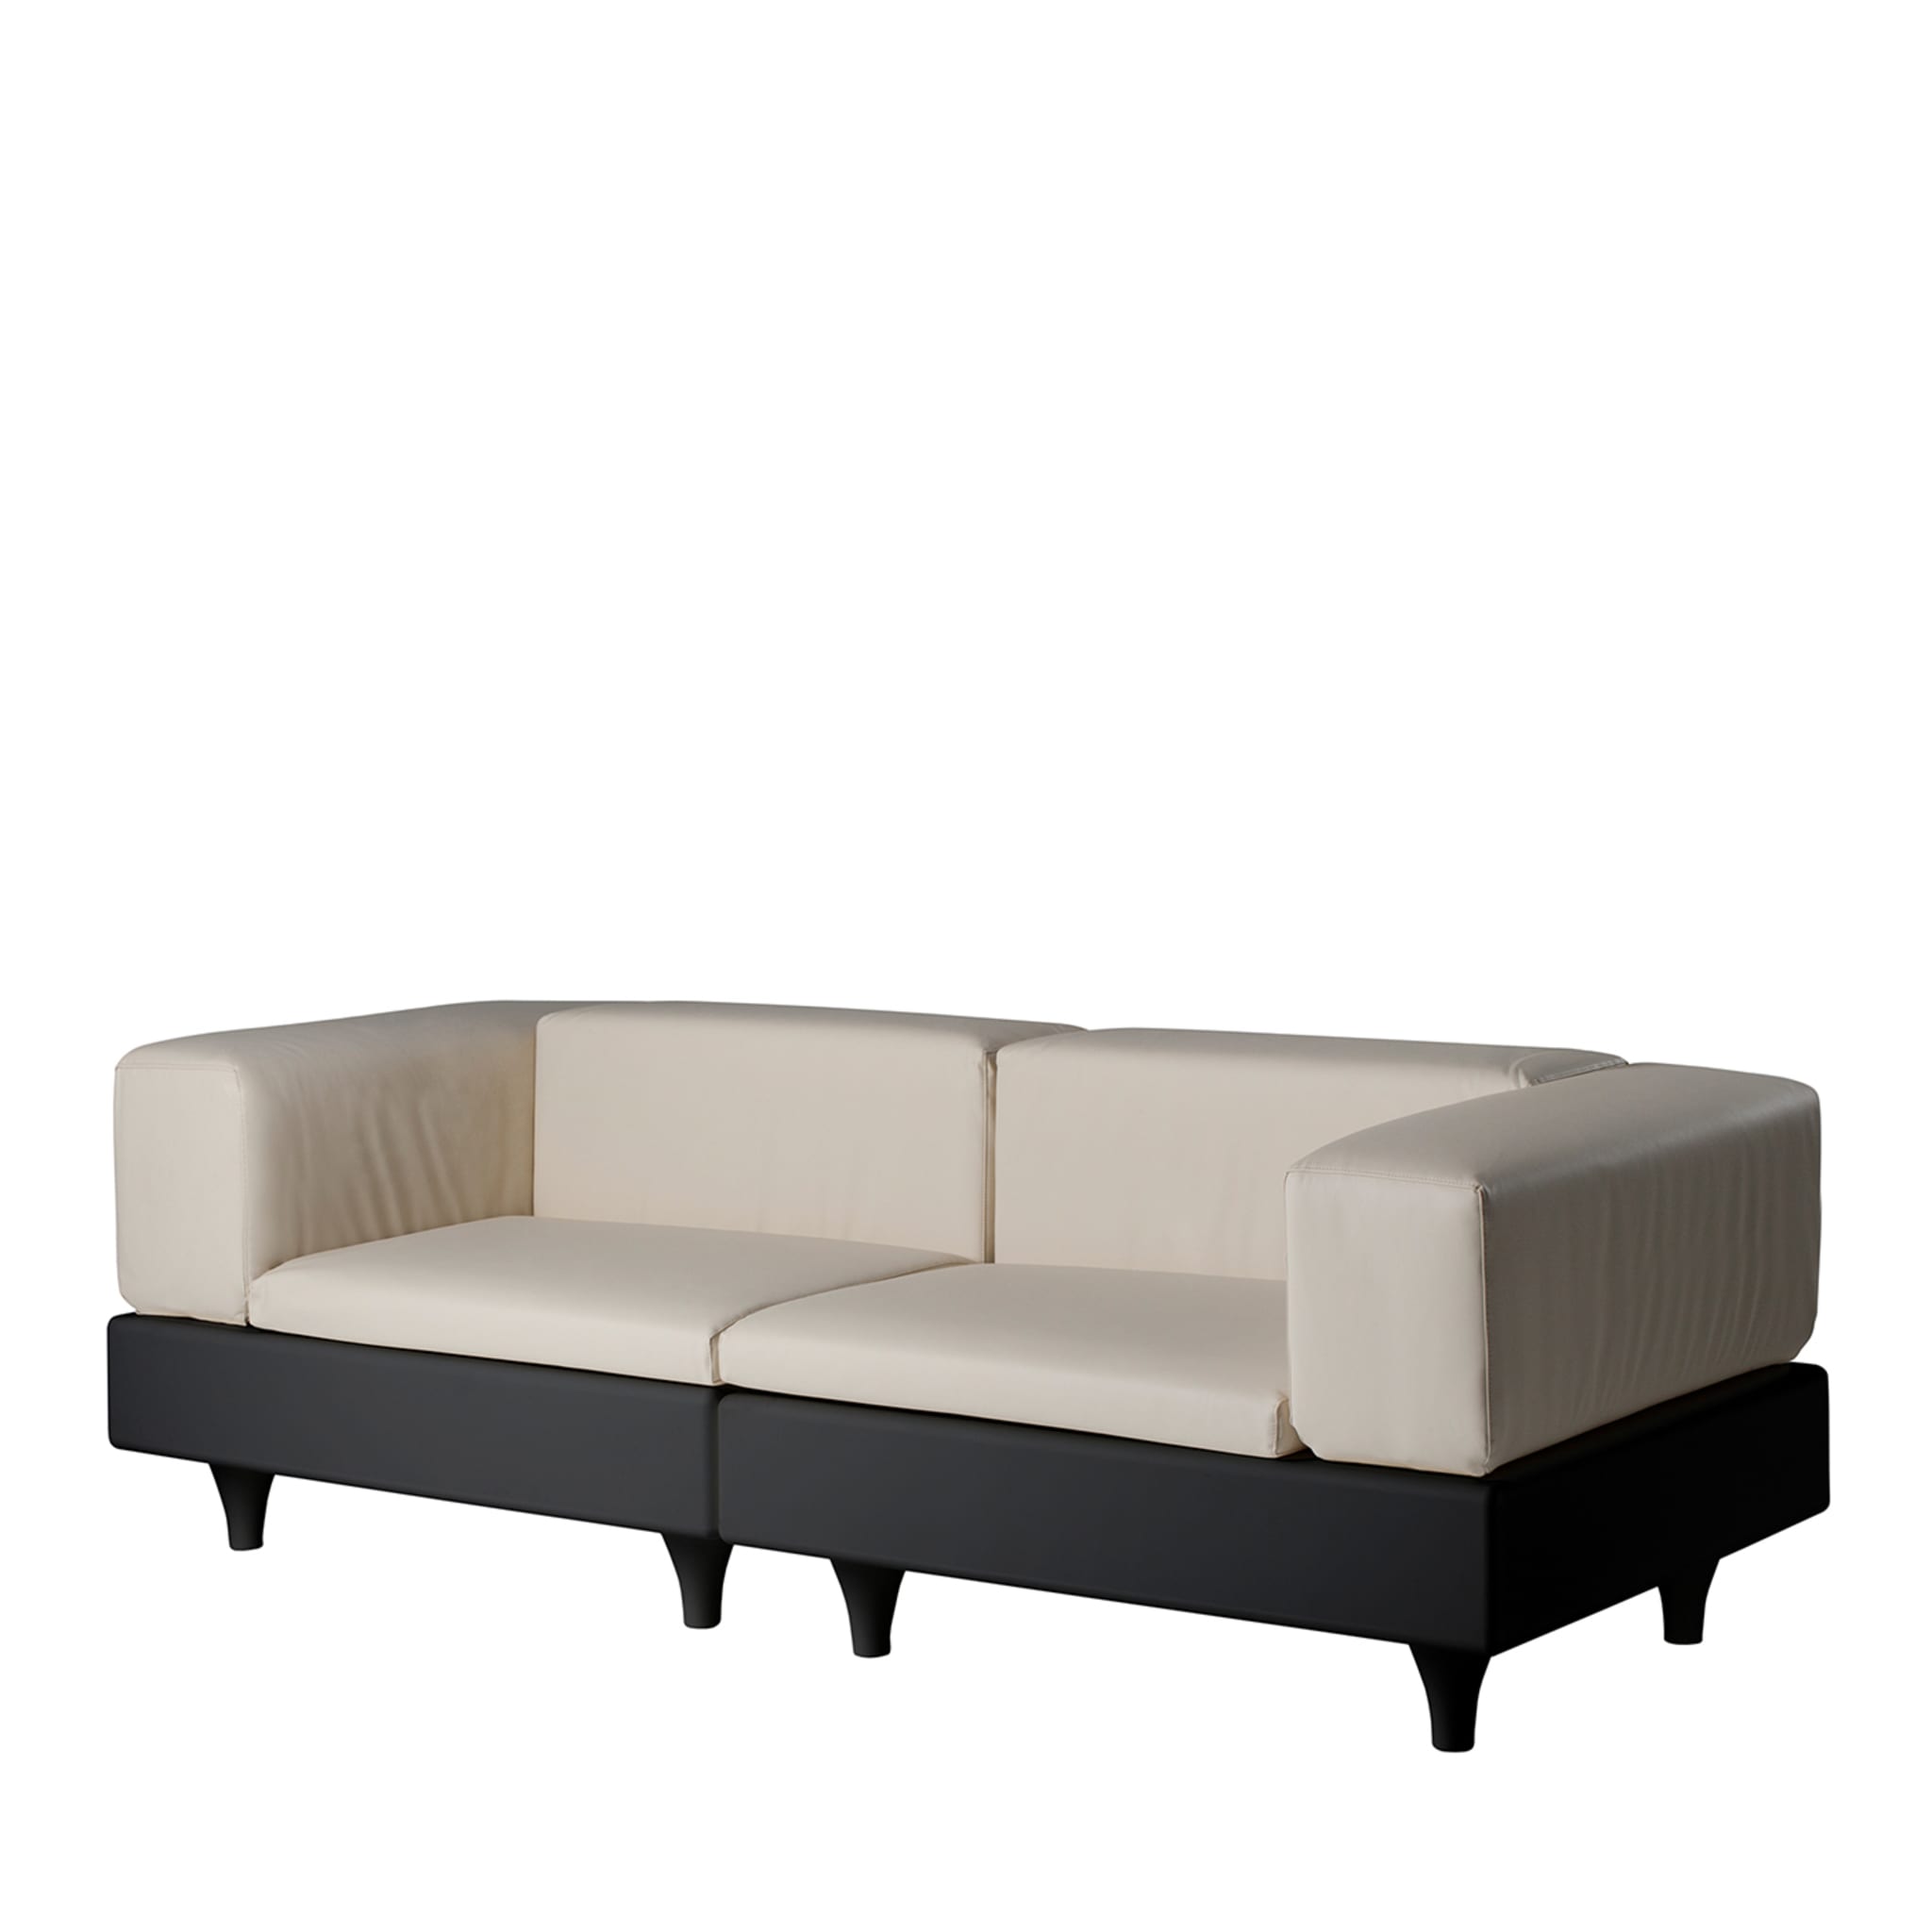 Happylife 2-Seater Black and Beige Sofa - Main view